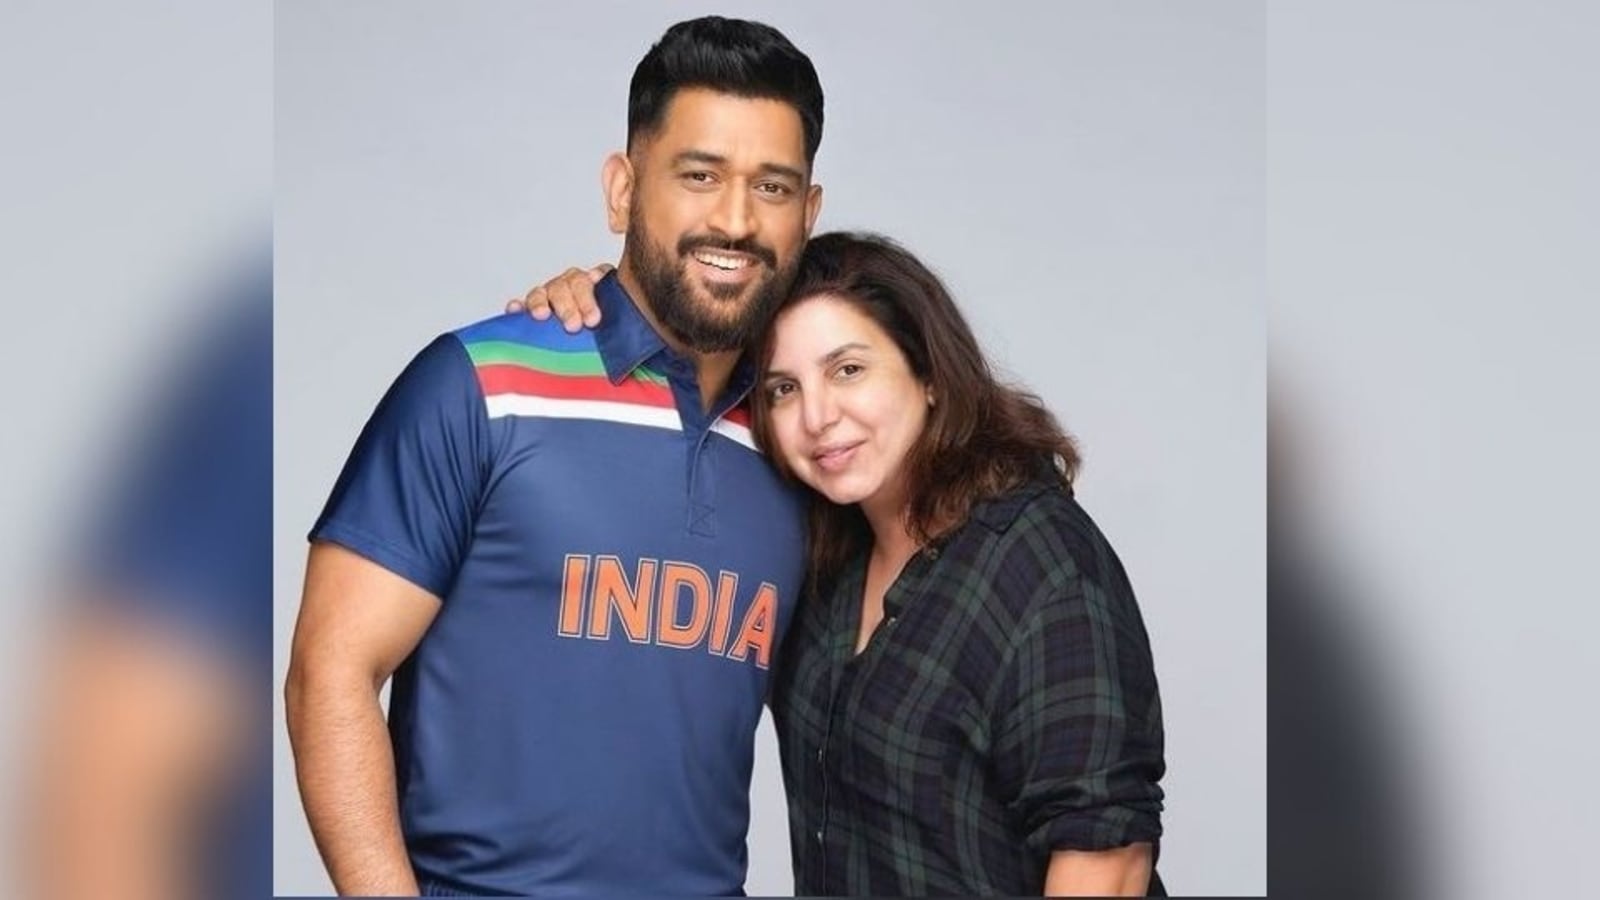 MS Dhoni dons retro Indian jersey for an ad shoot and fans are